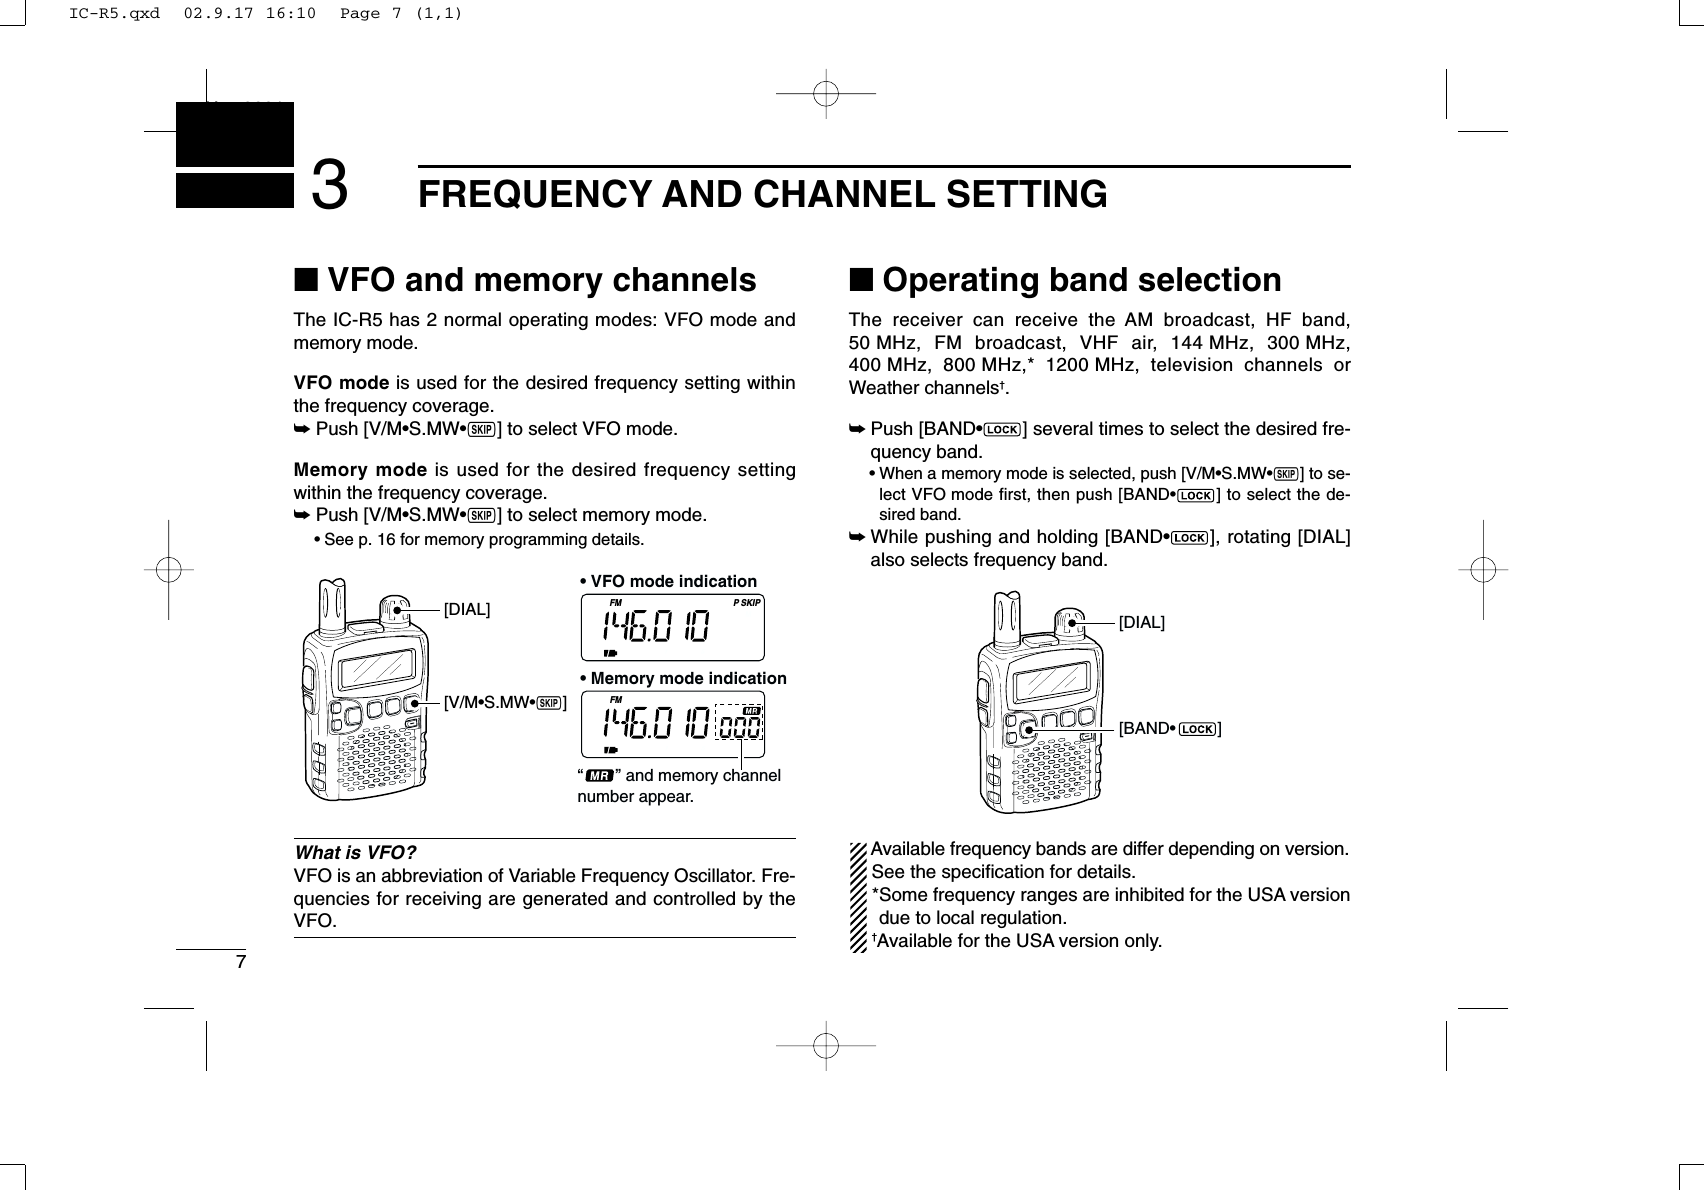 7FREQUENCY AND CHANNEL SETTINGNew20013■VFO and memory channelsThe IC-R5 has 2 normal operating modes: VFO mode andmemory mode.VFO mode is used for the desired frequency setting withinthe frequency coverage.➥Push [V/M•S.MW•~] to select VFO mode.Memory mode is used for the desired frequency settingwithin the frequency coverage.➥Push [V/M•S.MW•~] to select memory mode.•See p. 16 for memory programming details.What is VFO?VFO is an abbreviation of Variable Frequency Oscillator. Fre-quencies for receiving are generated and controlled by theVFO.■Operating band selectionThe receiver can receive the AM broadcast, HF band,50 MHz, FM broadcast, VHF air, 144 MHz, 300 MHz,400 MHz, 800 MHz,* 1200 MHz, television channels orWeather channels†.➥Push [BAND•] several times to select the desired fre-quency band.•When a memory mode is selected, push [V/M•S.MW•~] to se-lect VFO mode first, then push [BAND•] to select the de-sired band.➥While pushing and holding [BAND•], rotating [DIAL]also selects frequency band.Available frequency bands are differ depending on version.See the speciﬁcation for details.*Some frequency ranges are inhibited for the USA versiondue to local regulation.†Available for the USA version only.[BAND•         ][DIAL]FM SKIPPFM[DIAL][V/M•S.MW•~]“       ” and memory channel number appear.• VFO mode indication• Memory mode indicationIC-R5.qxd  02.9.17 16:10  Page 7 (1,1)